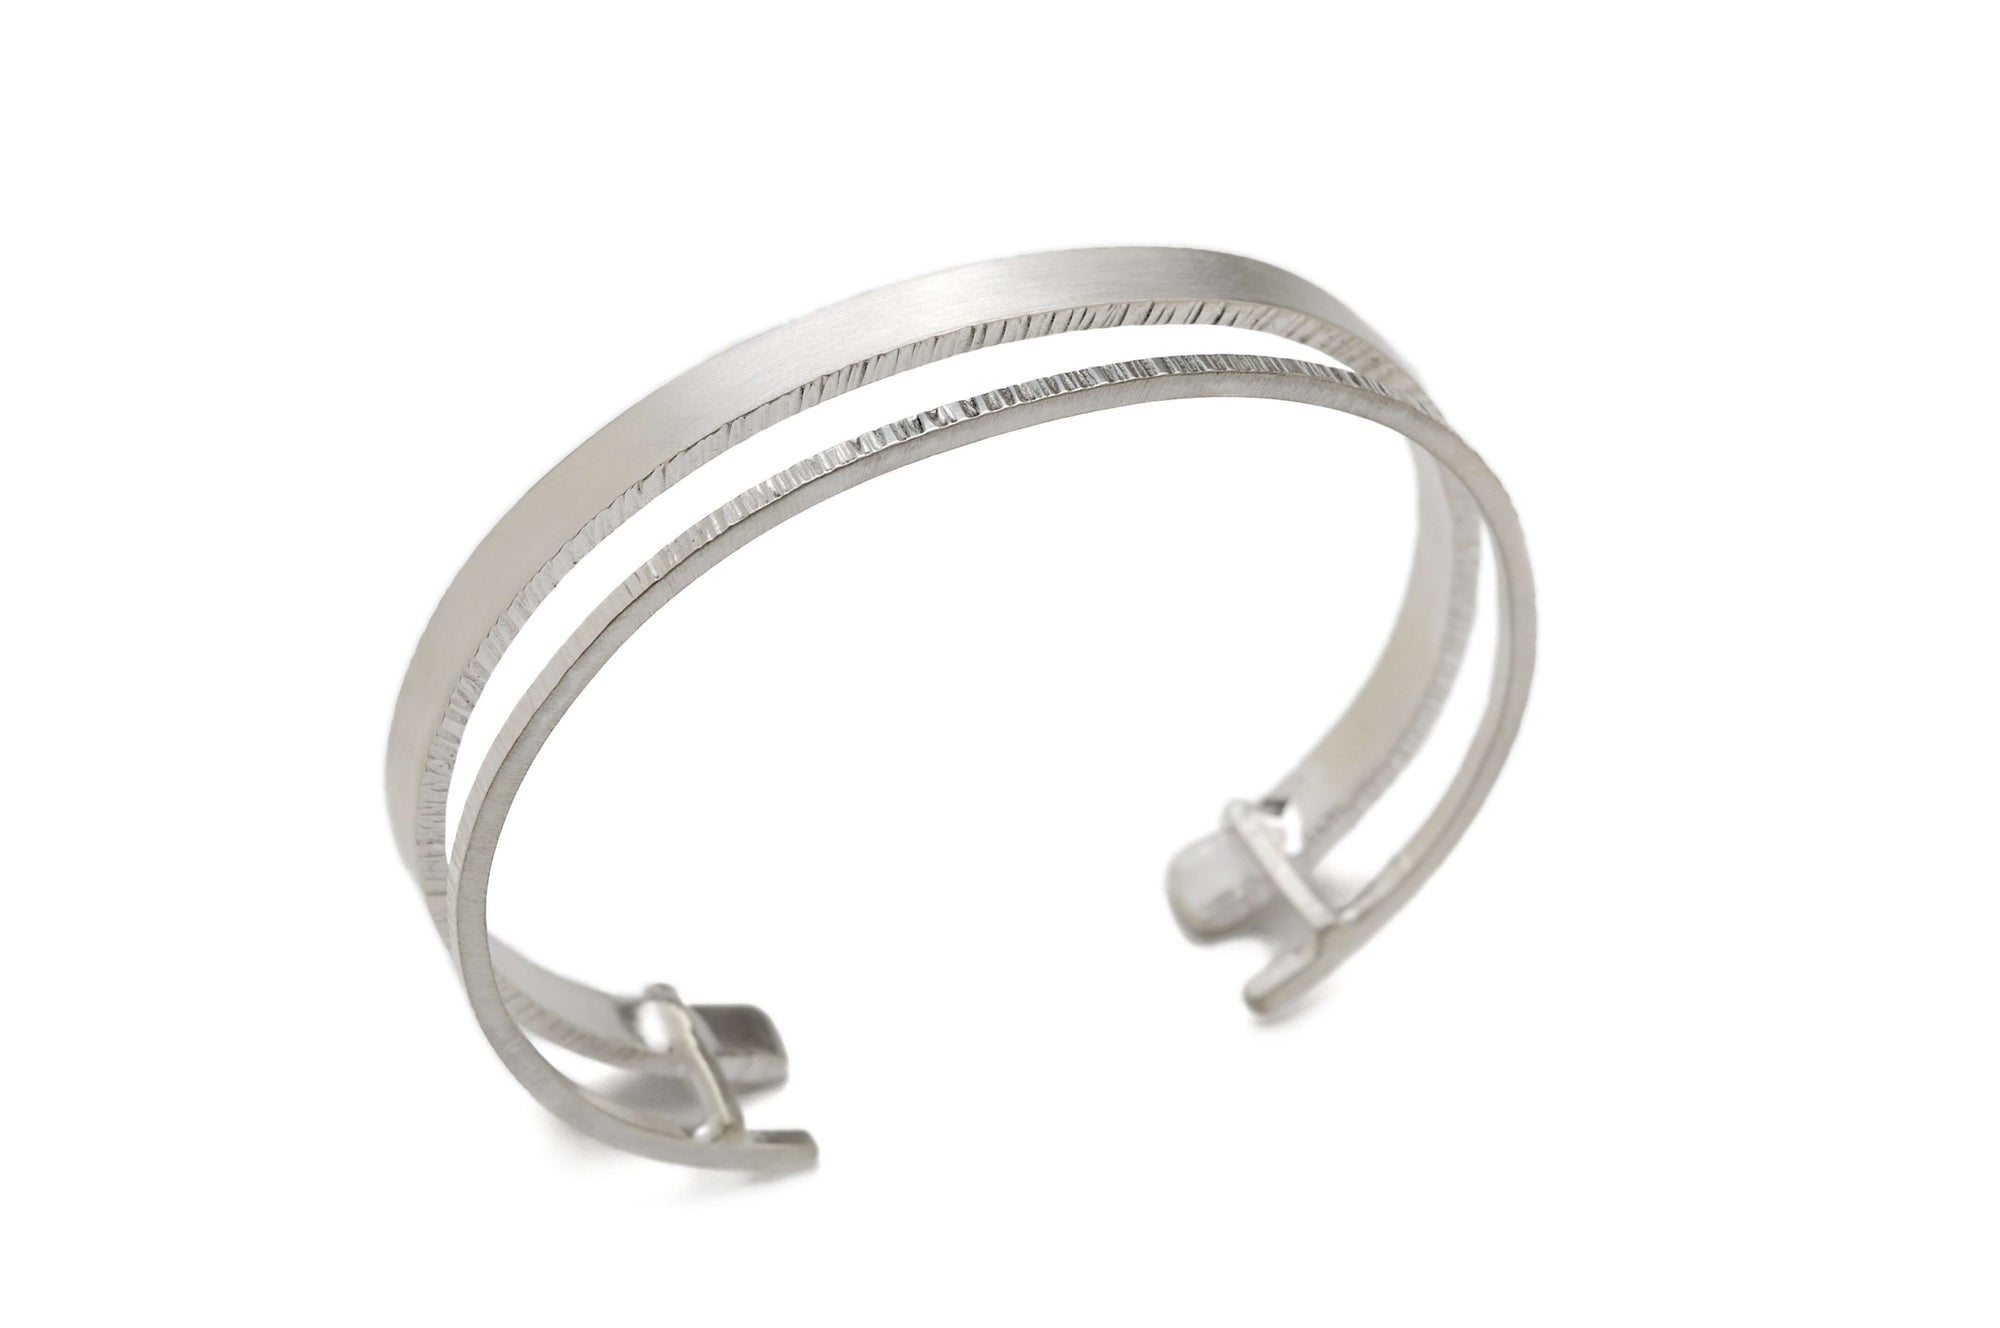 A hammered sterling silver cuff bracelet